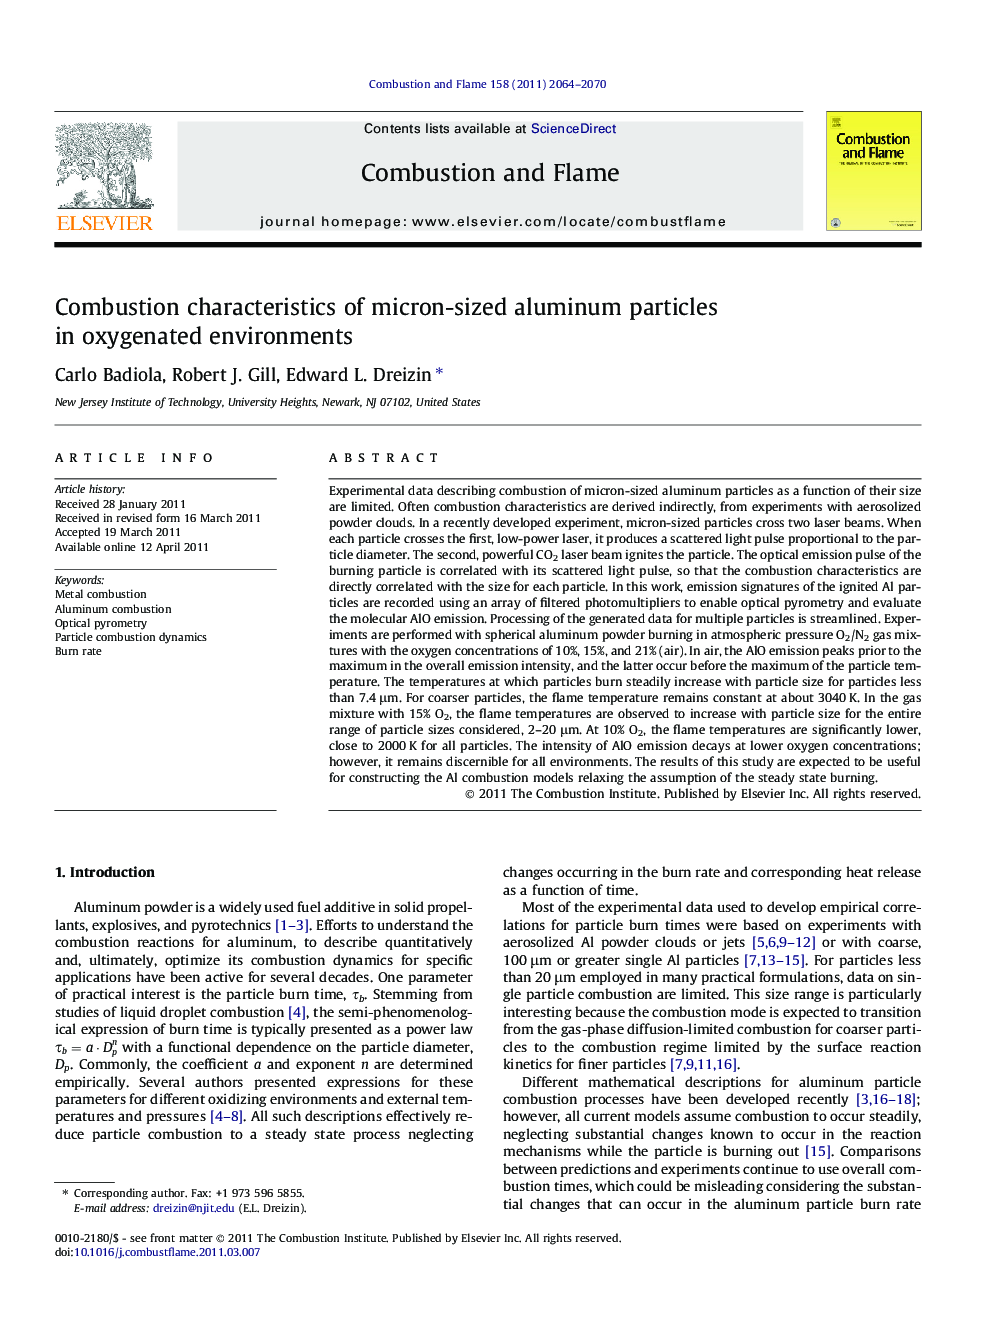 Combustion characteristics of micron-sized aluminum particles in oxygenated environments